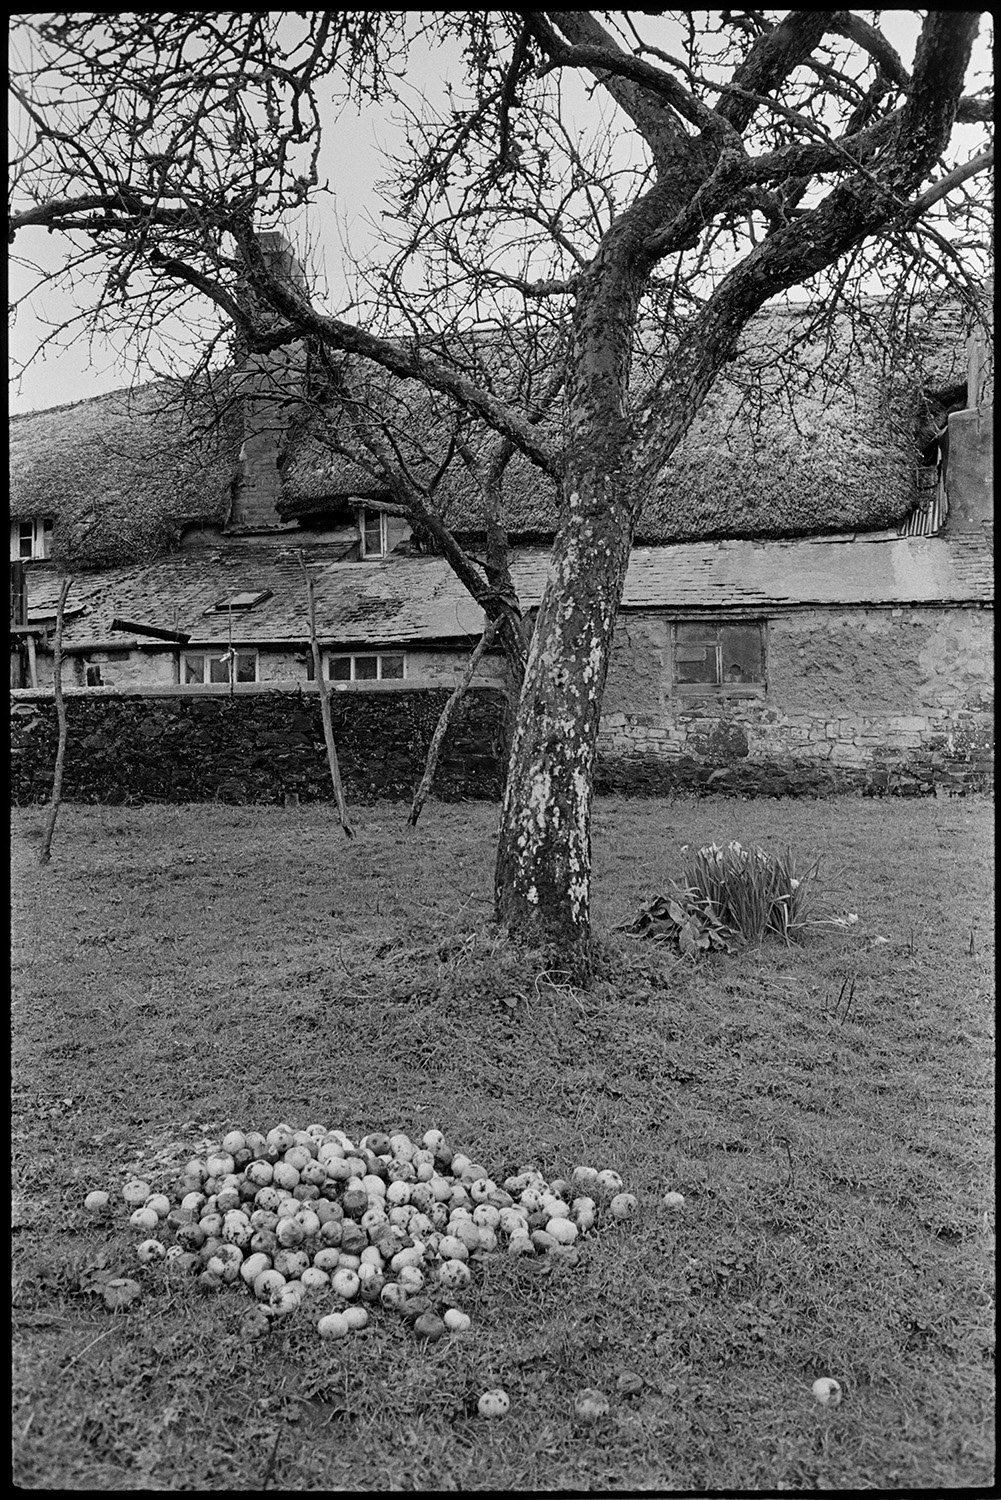 A pile of apples under a tree in an orchard at Rashleigh Mill, Bridge Reeve. A thatch and cob farmhouse can be seen in the background.